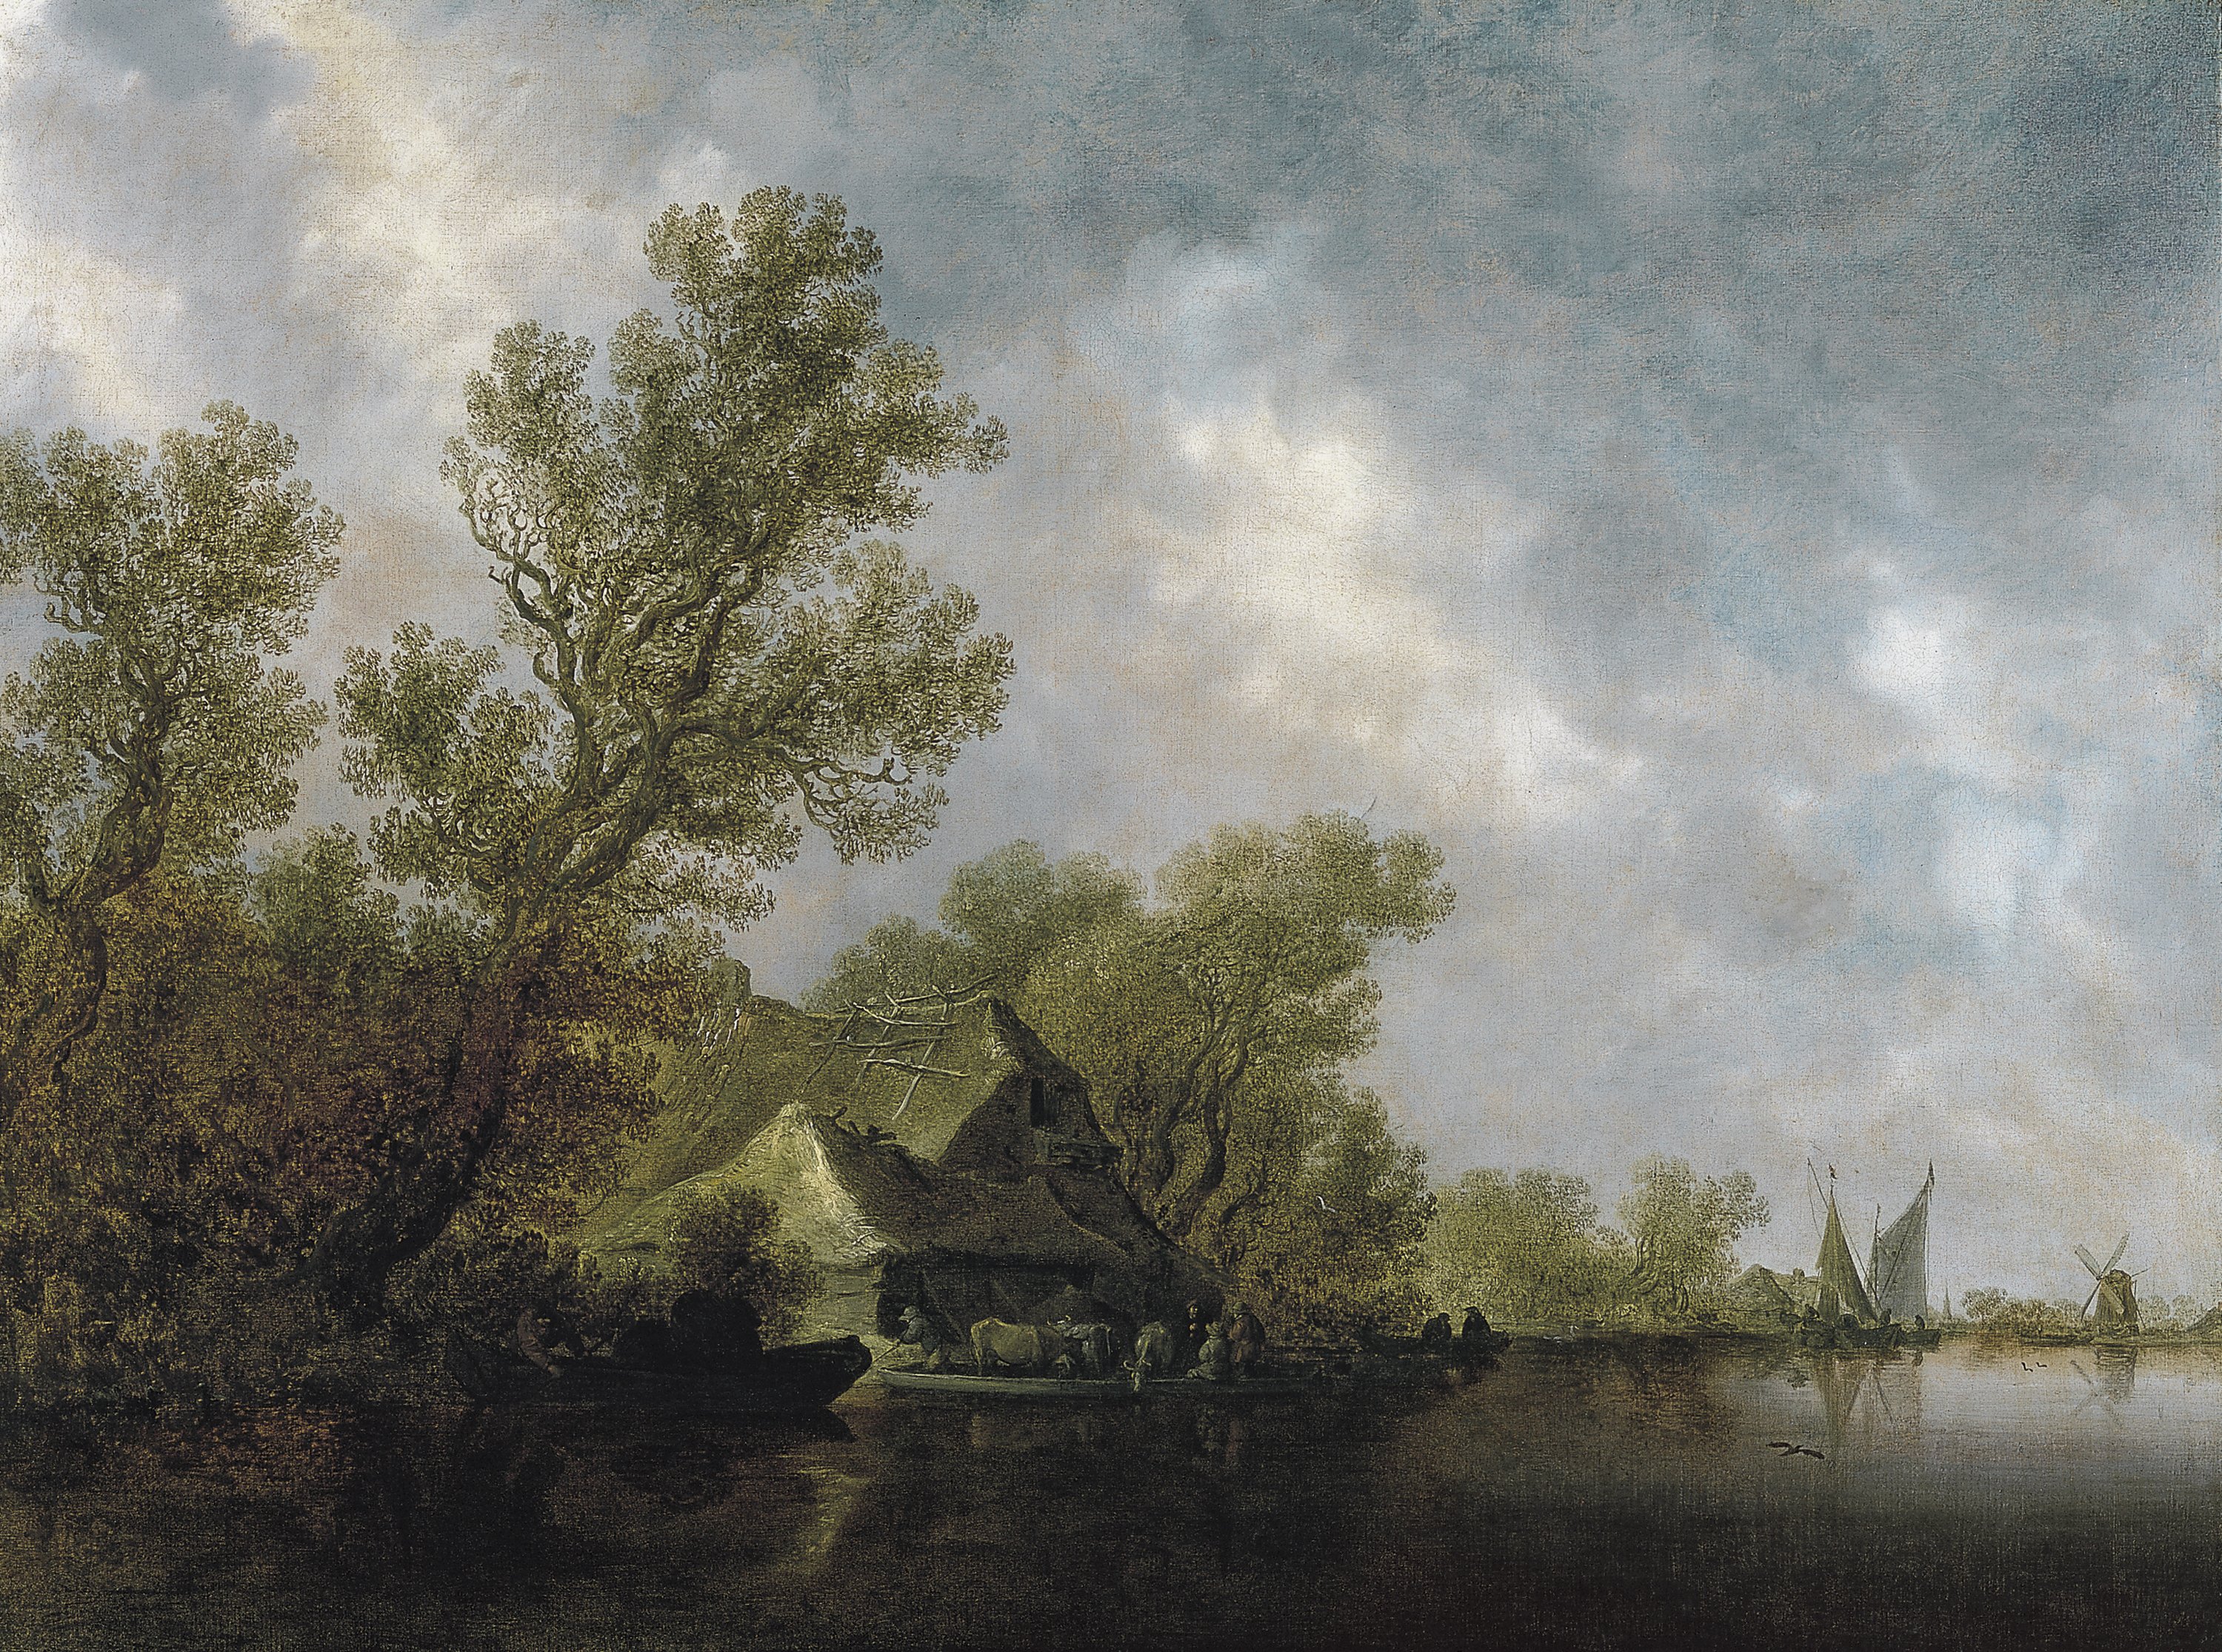 River Landscape with Ferry Boat and Cottages. Paisaje fluvial con transbordador y cabañas, 1634